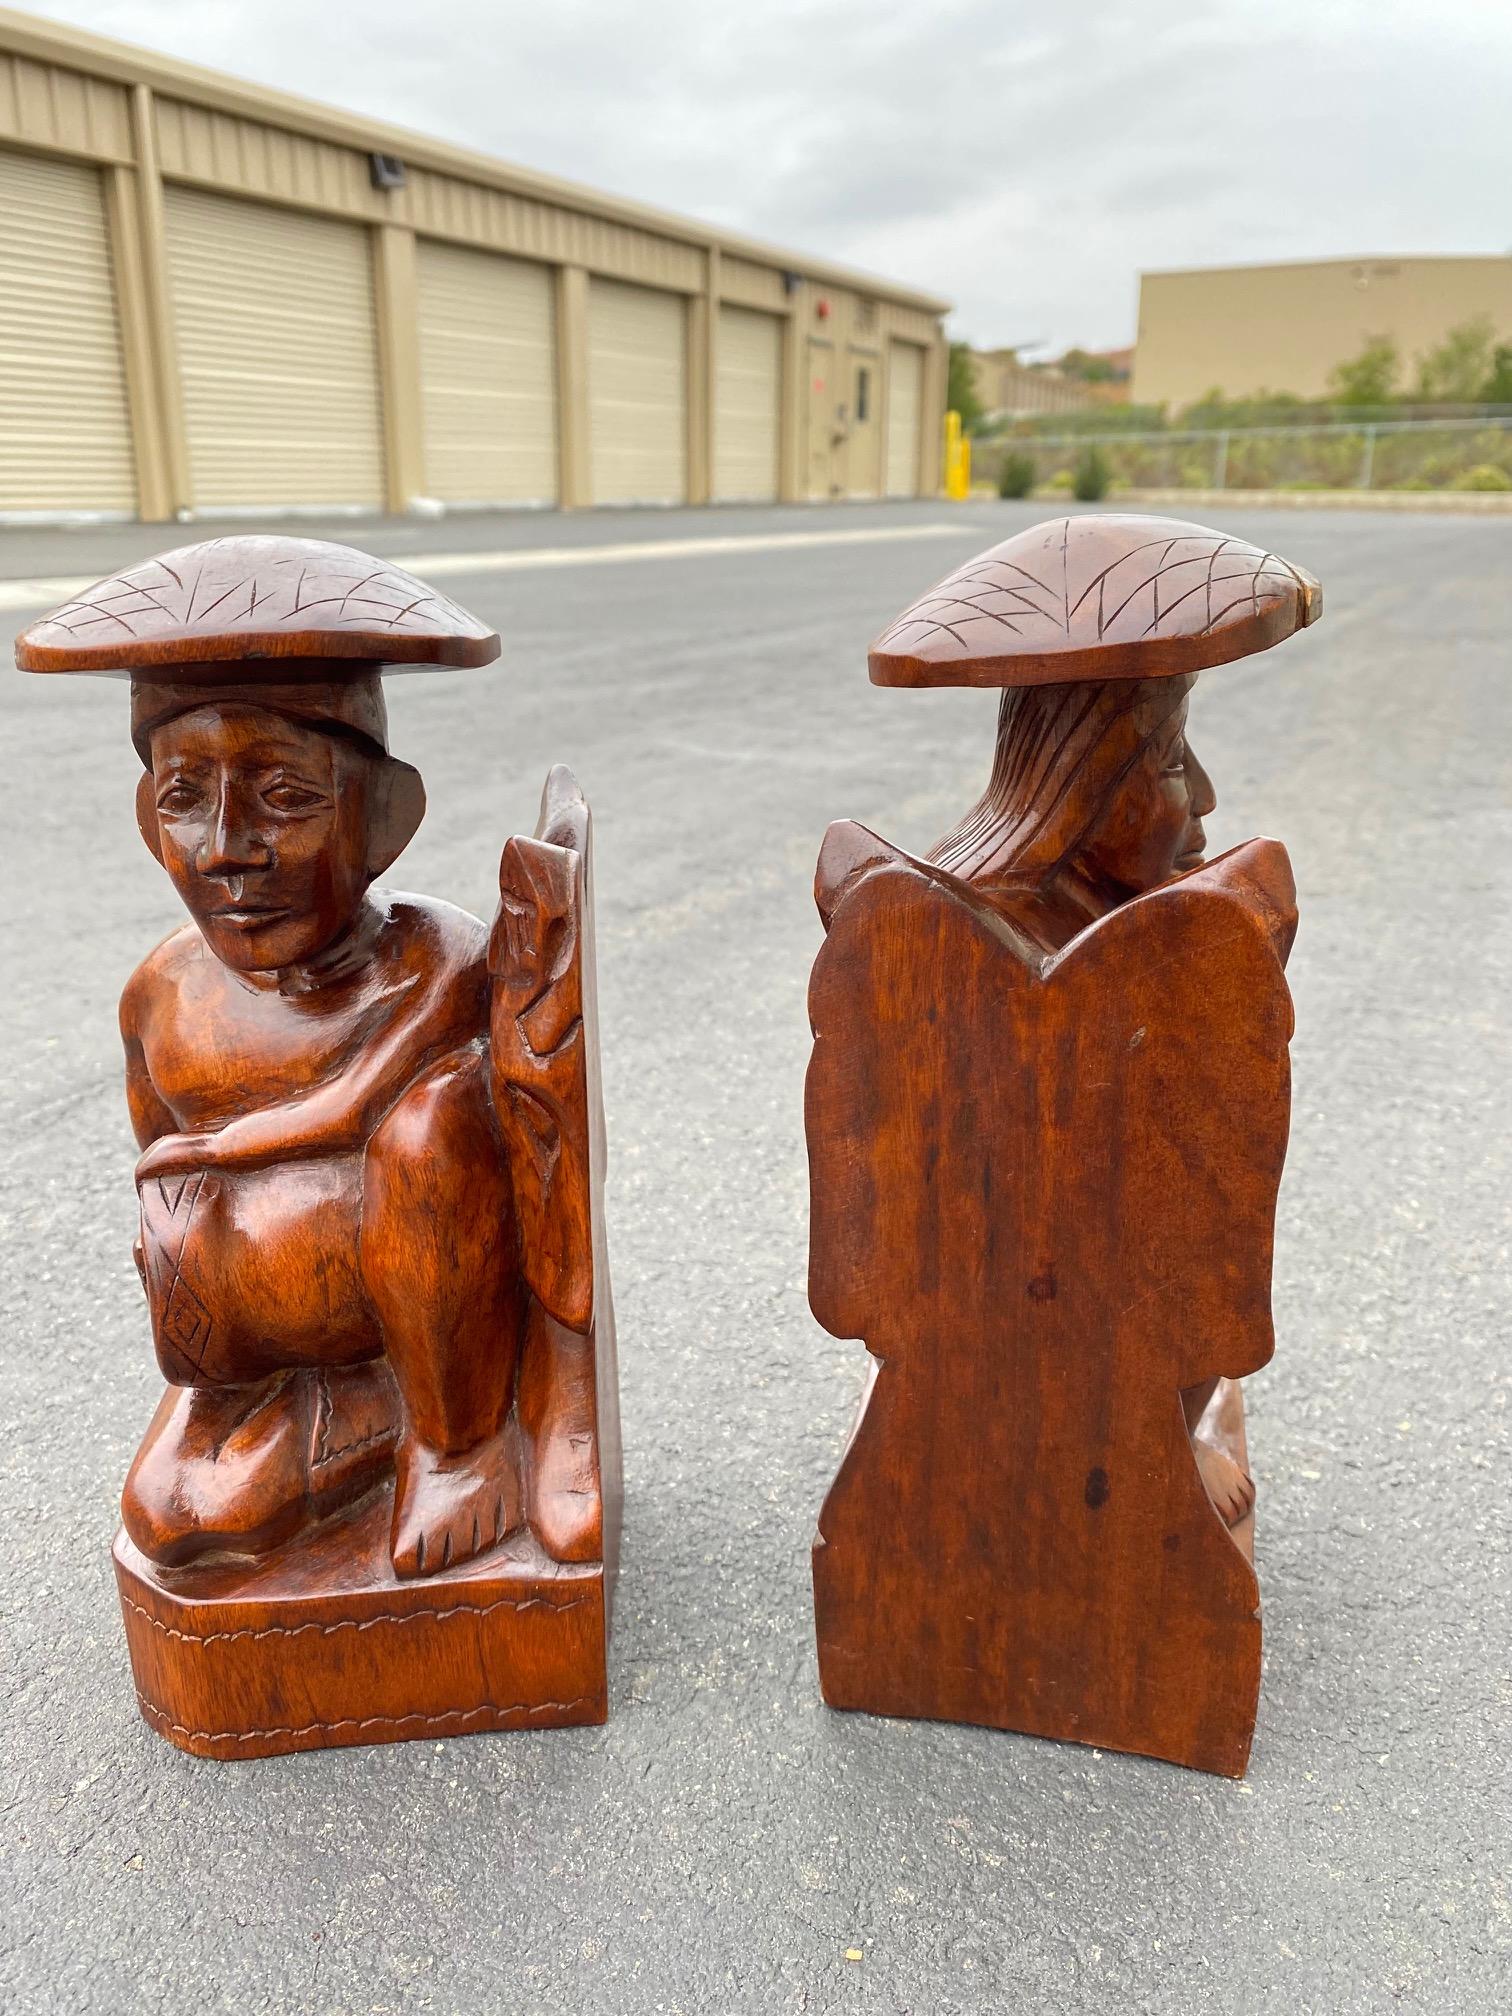 Beautiful pair of mid century bookends. Done in a traditional folk style. From the island-nations of the South Pacific.